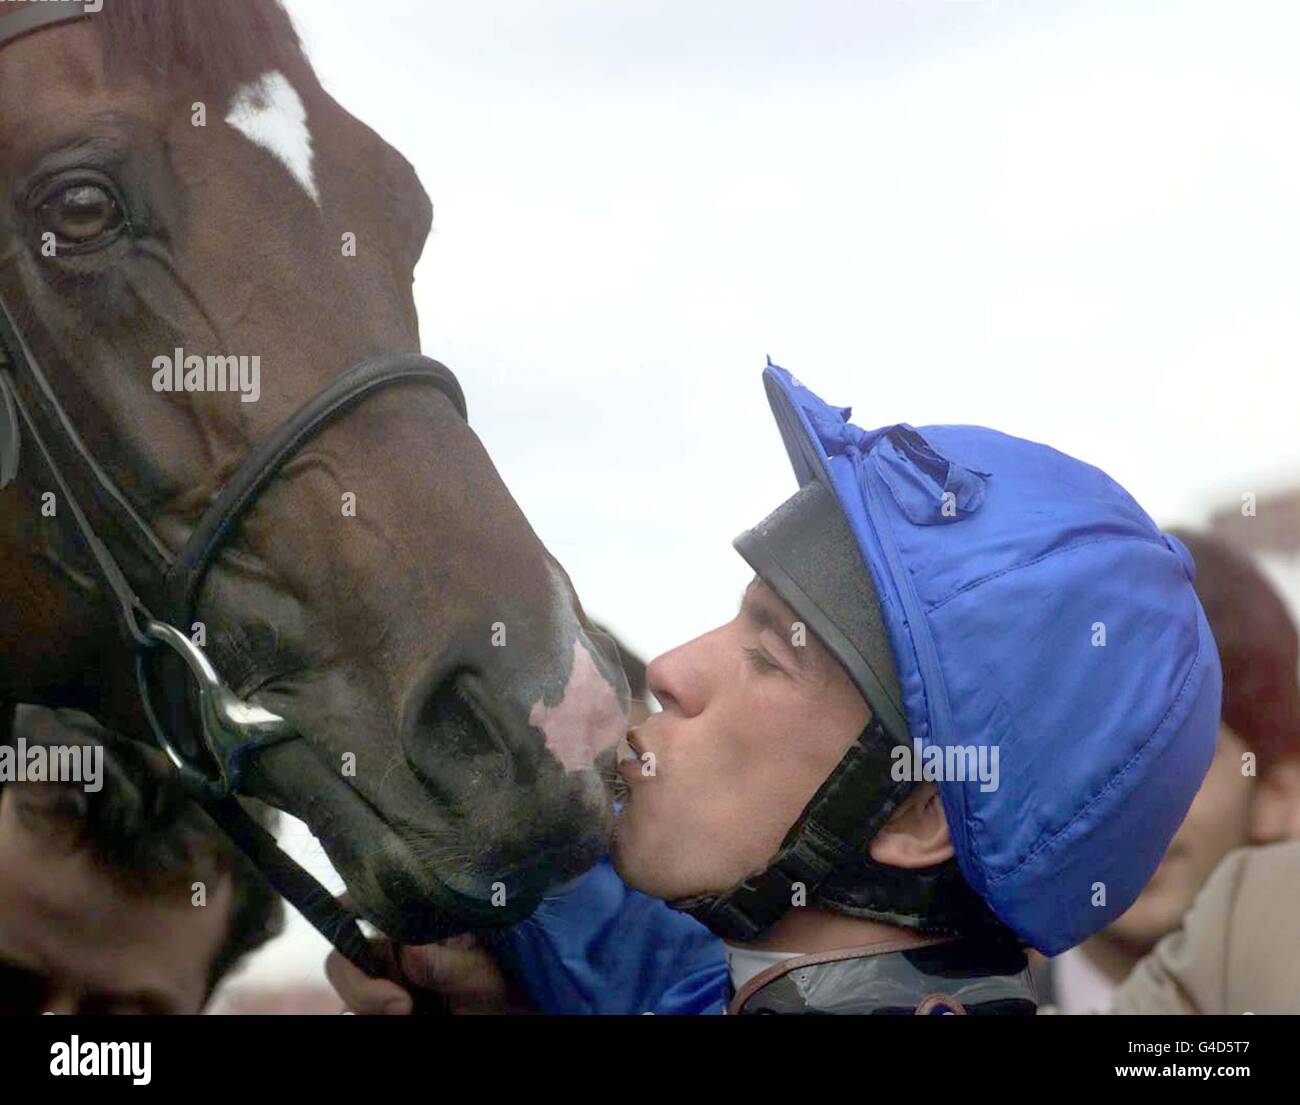 Frankie Dettori kisses Swain after after winning the King George VI and the Queen Elizabeth Diamond Stakes at Ascot this afternoon (Saturday). Photo by Adam Butler. Stock Photo